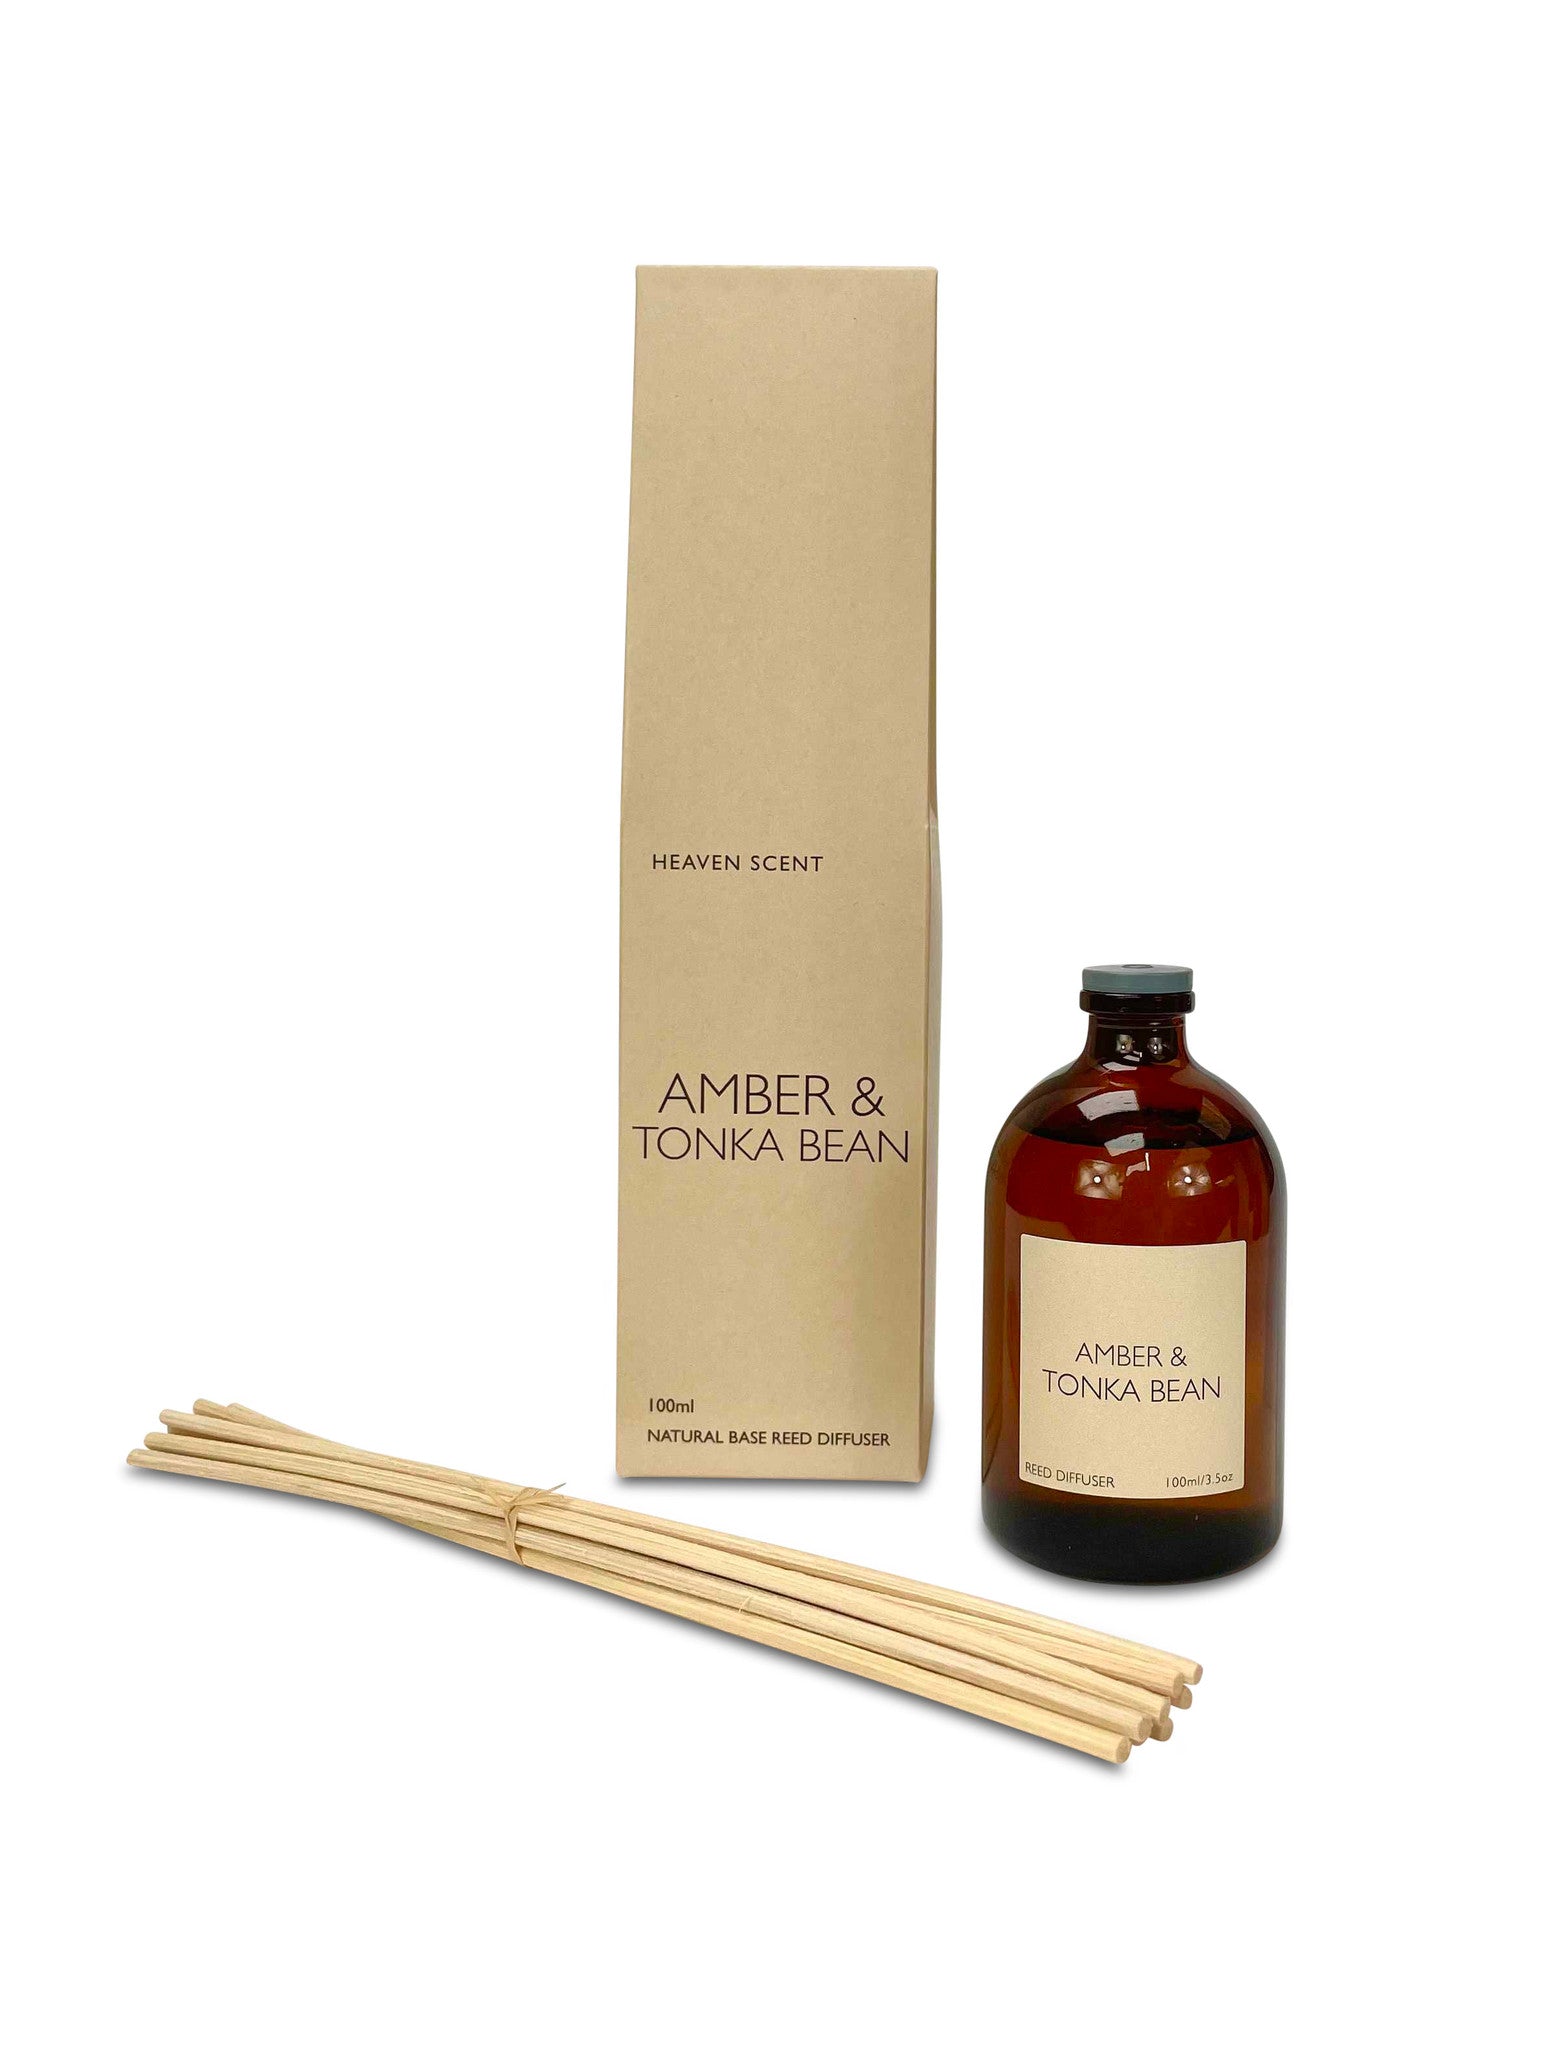 Amber & Tonka Bean Diffuser with warm tones of Amber and nutty, spice of the Tonka bean